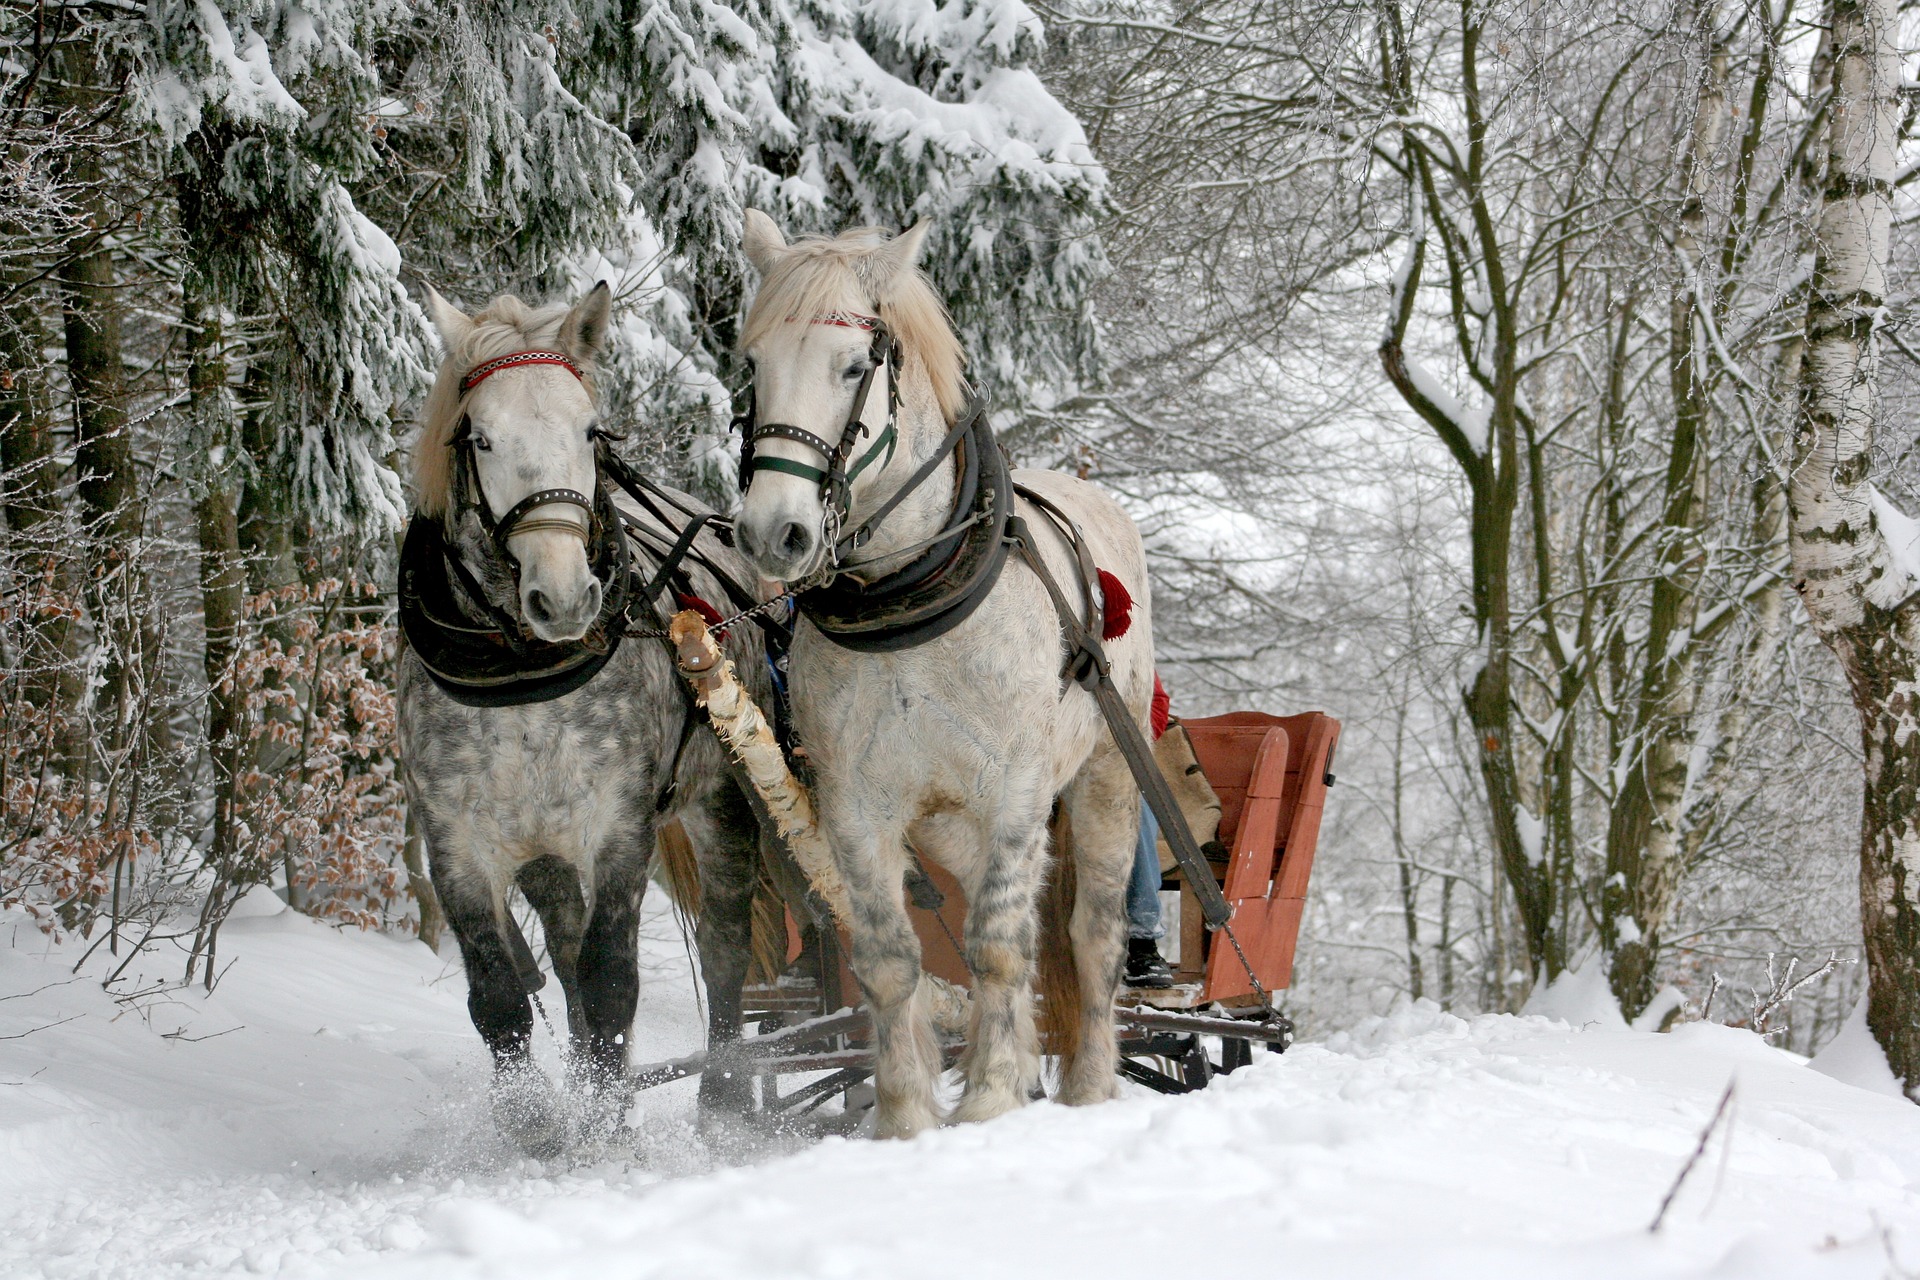 Enjoy a sleigh ride on your list of romantic trip to Lake Tahoe